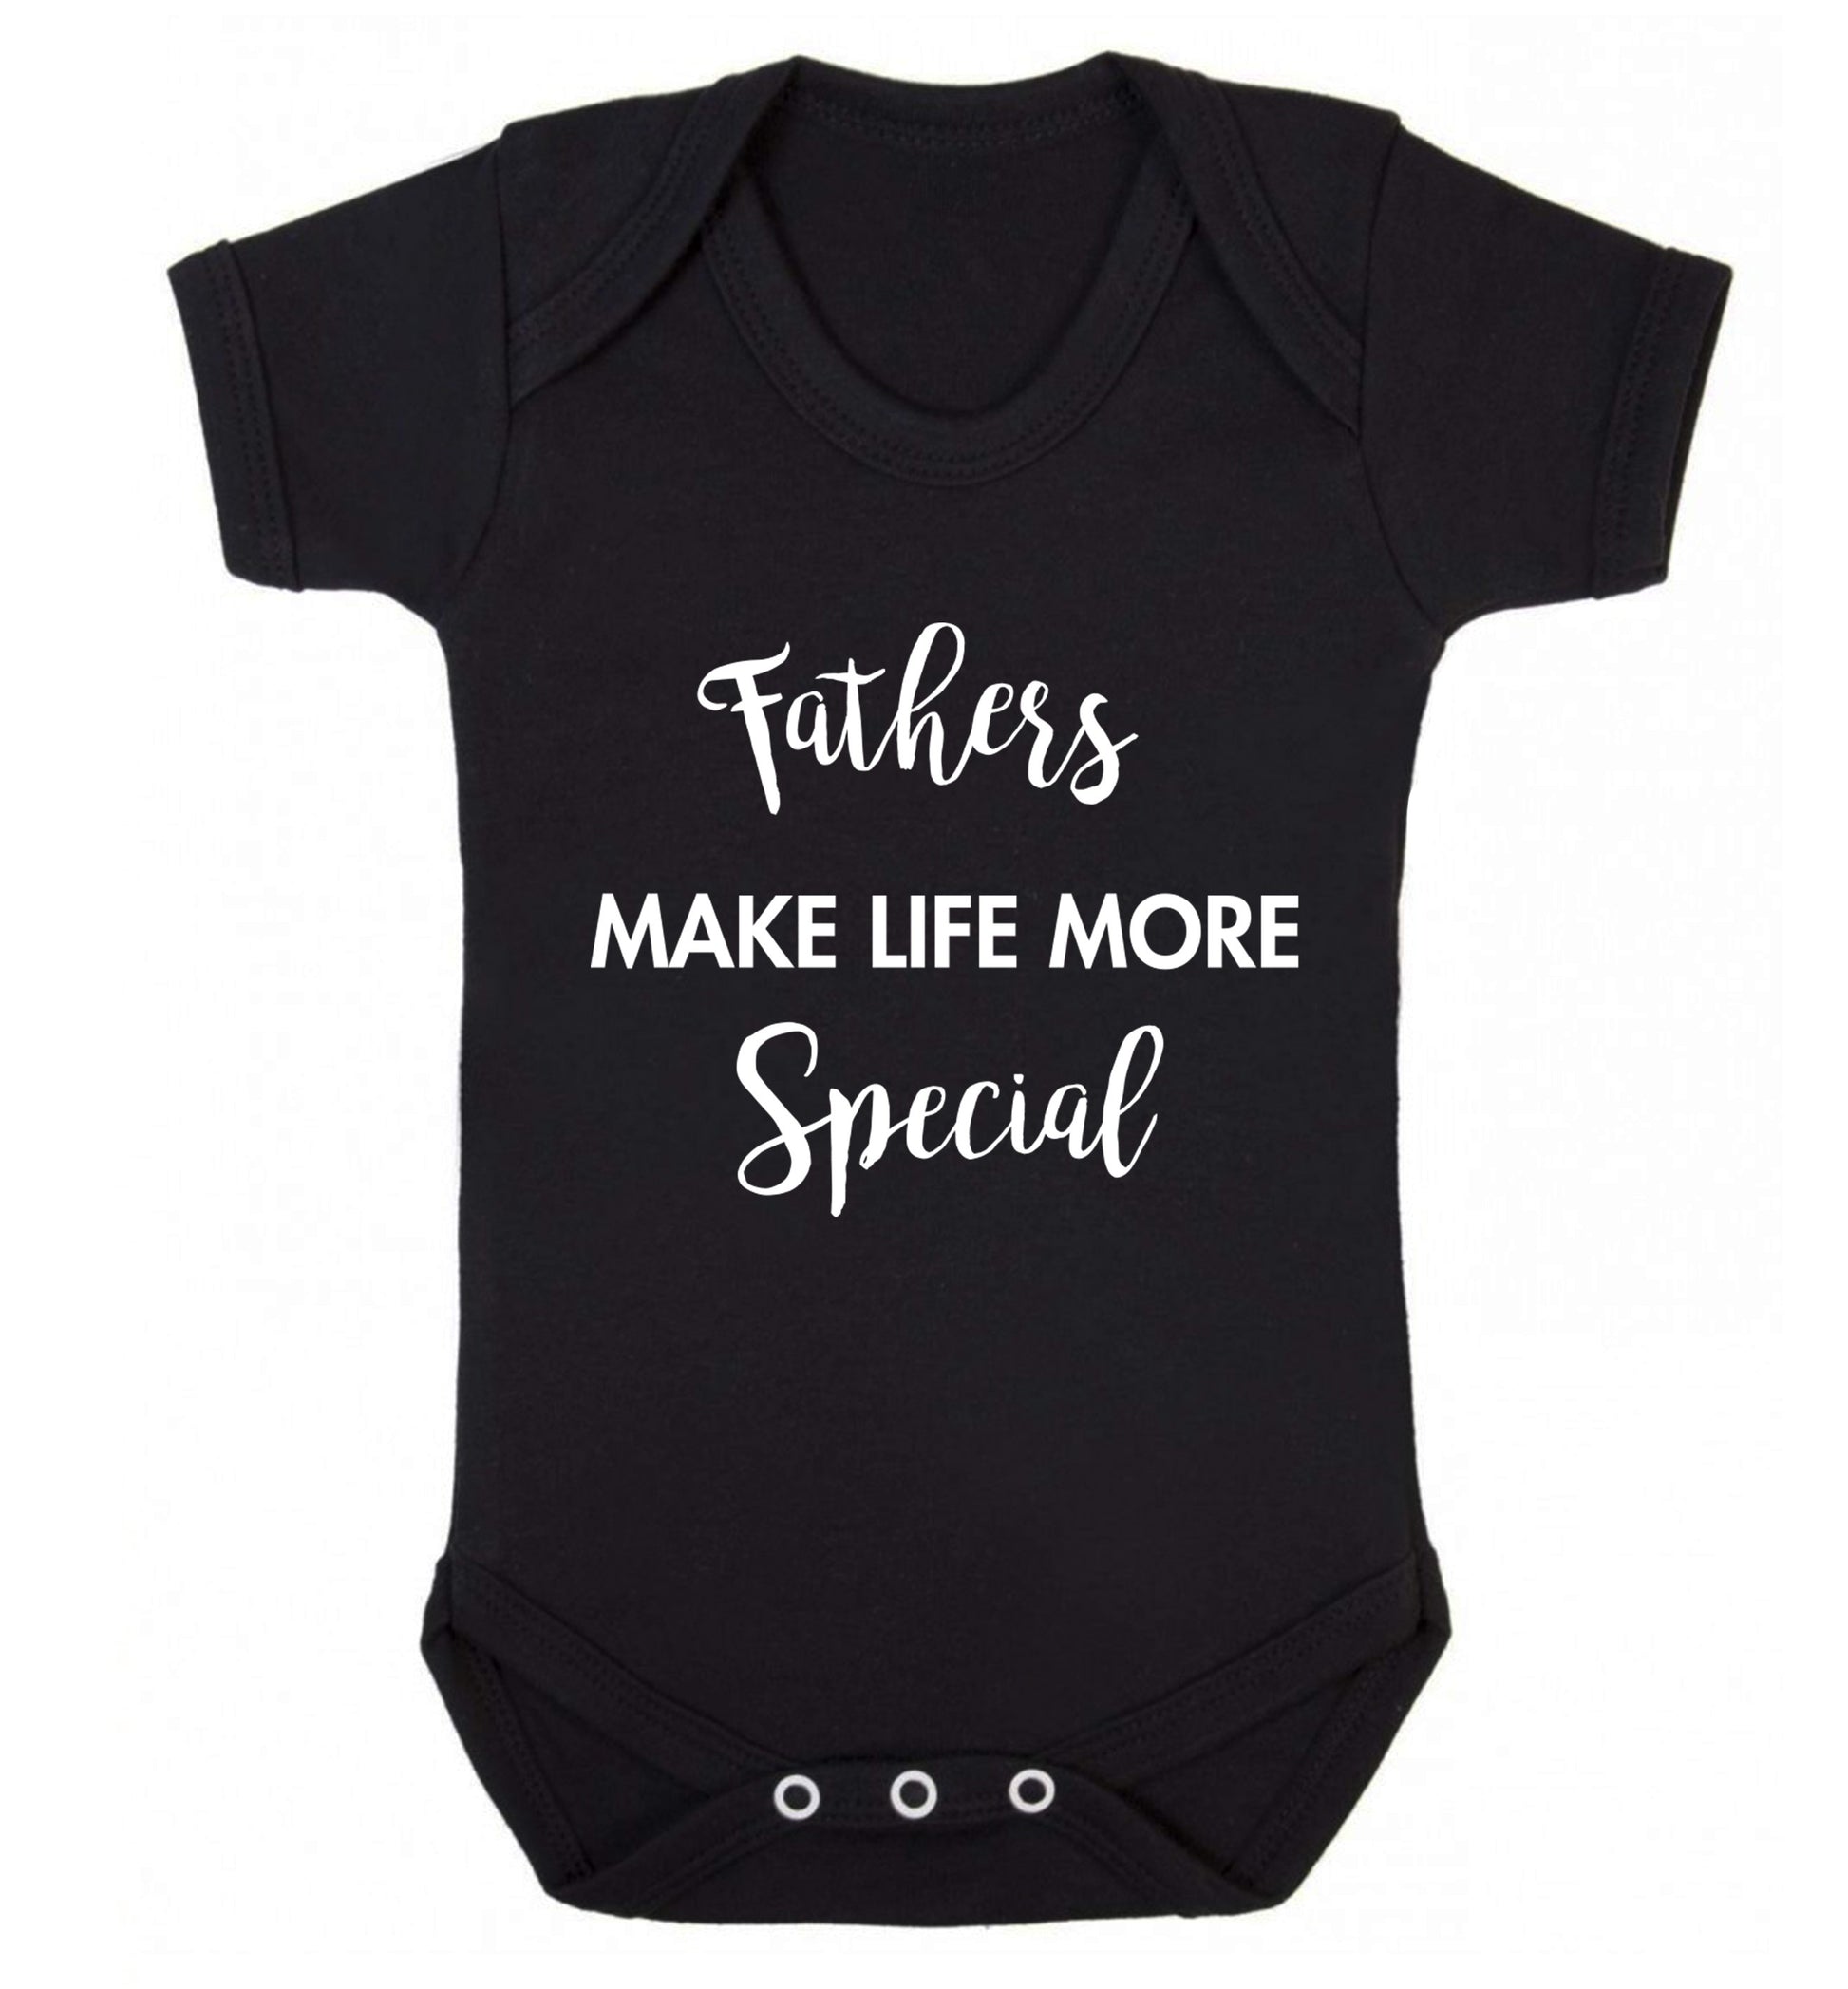 Fathers make life more special Baby Vest black 18-24 months